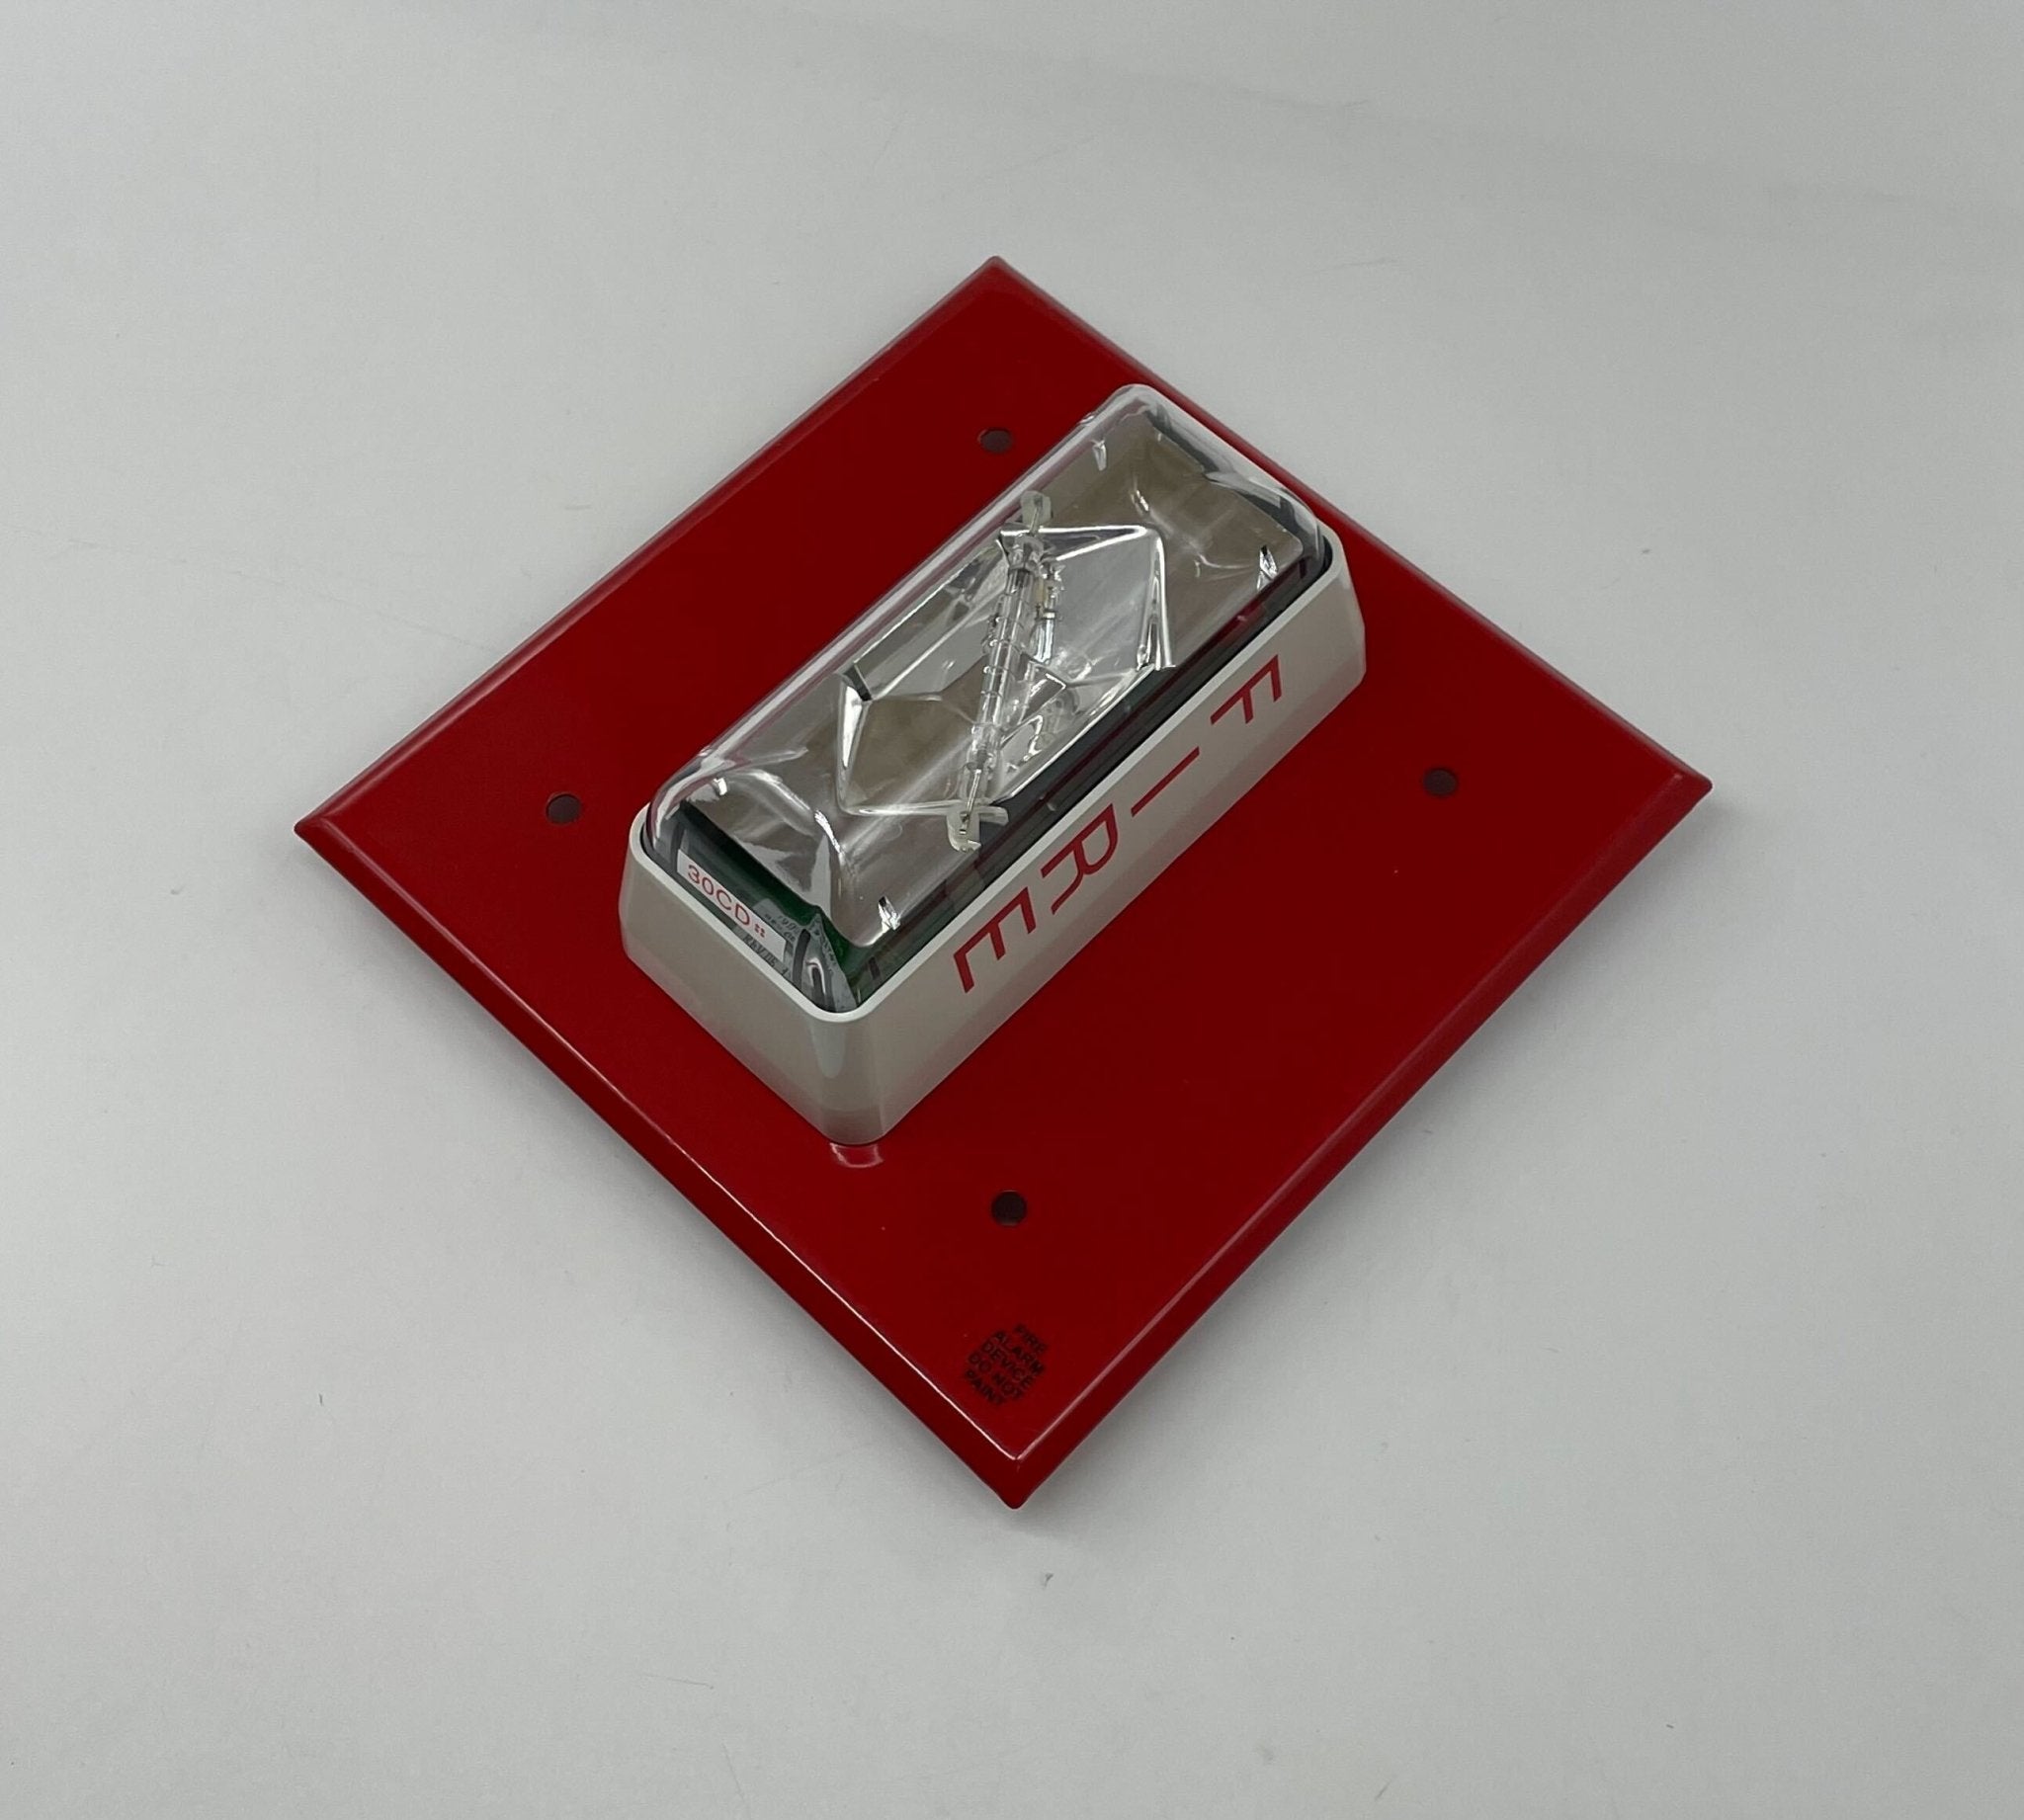 Edwards 405-3A-T - The Fire Alarm Supplier